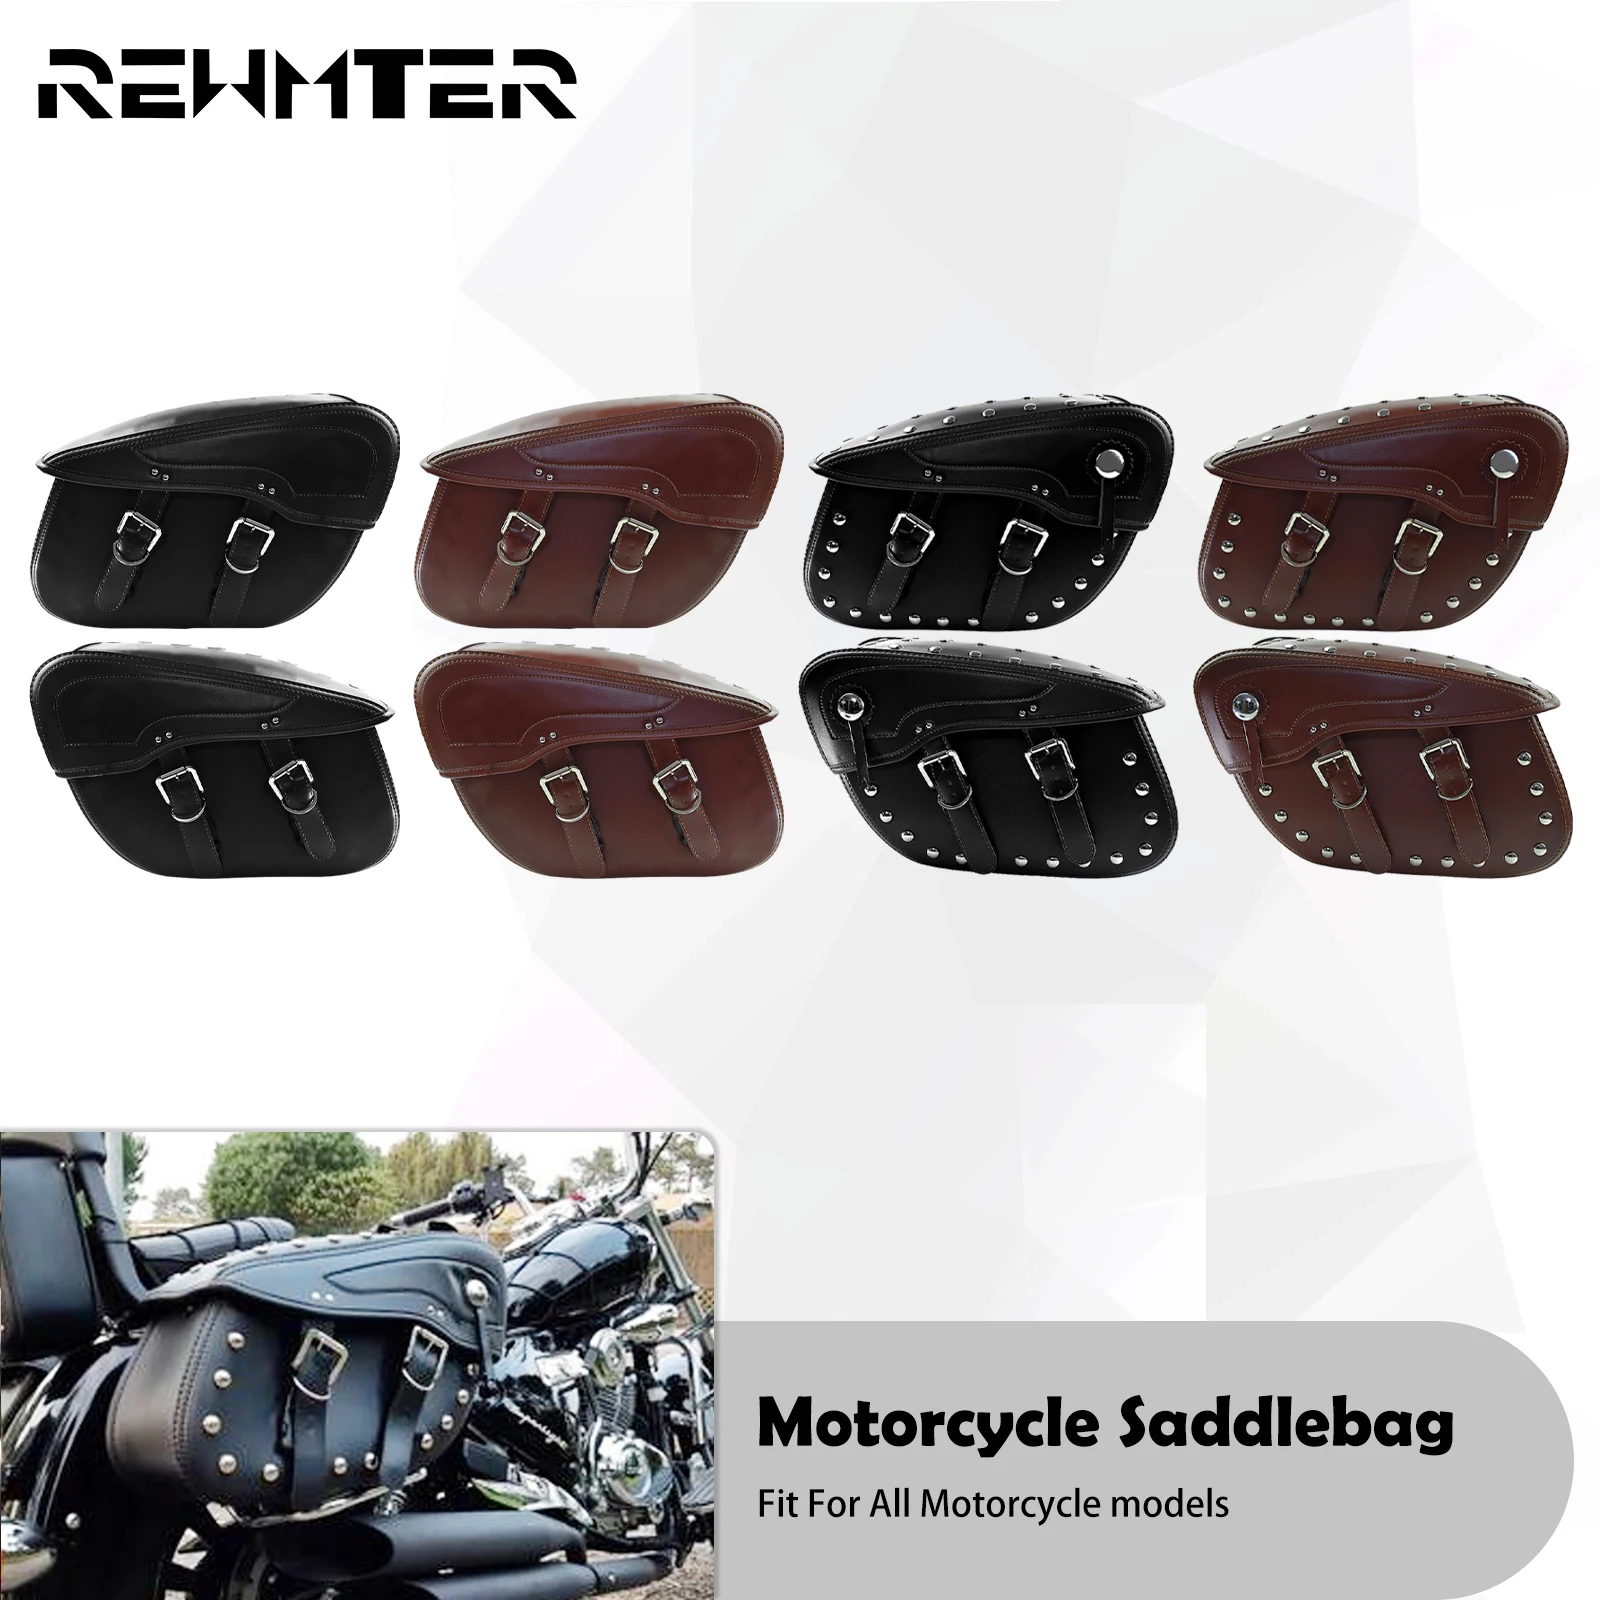 Motorcycle Leather Saddlebag Pouch Side Luggage Tool Bags Black/Brown For Harley Softail Dyna Touring Sportster XL 883 1200 48